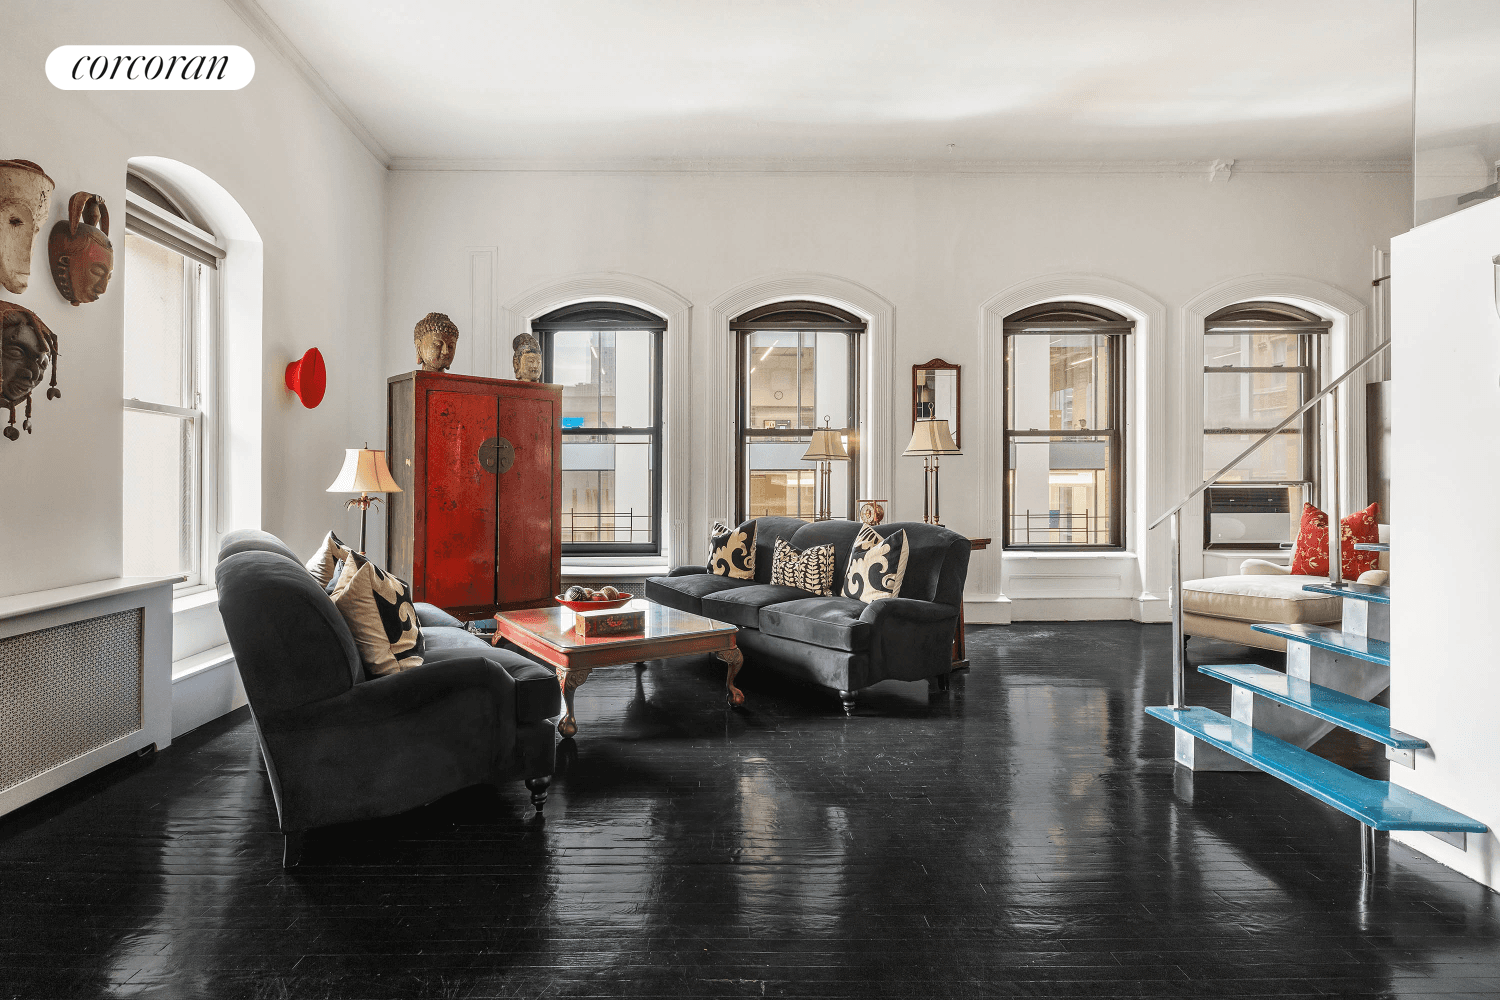 Introducing Residence 4B at 140 Nassau a versatile loft space that artfully combines historic charm with contemporary living.